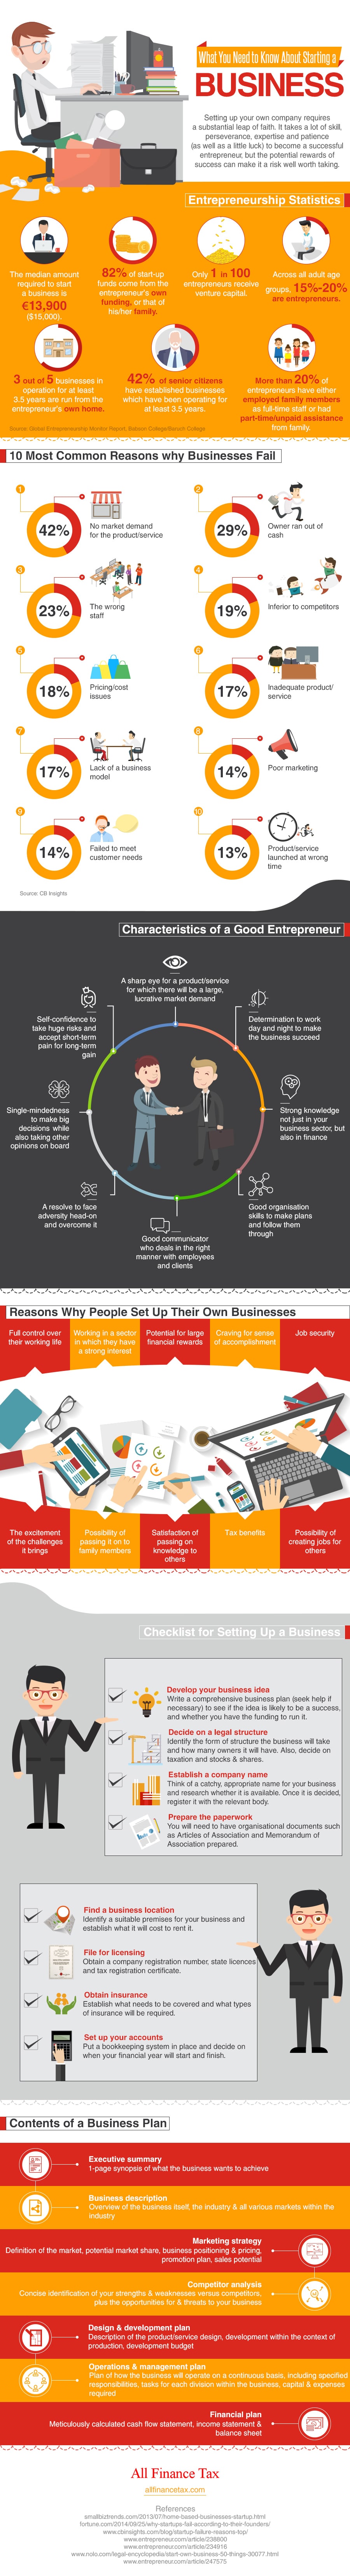 starting a business infographic